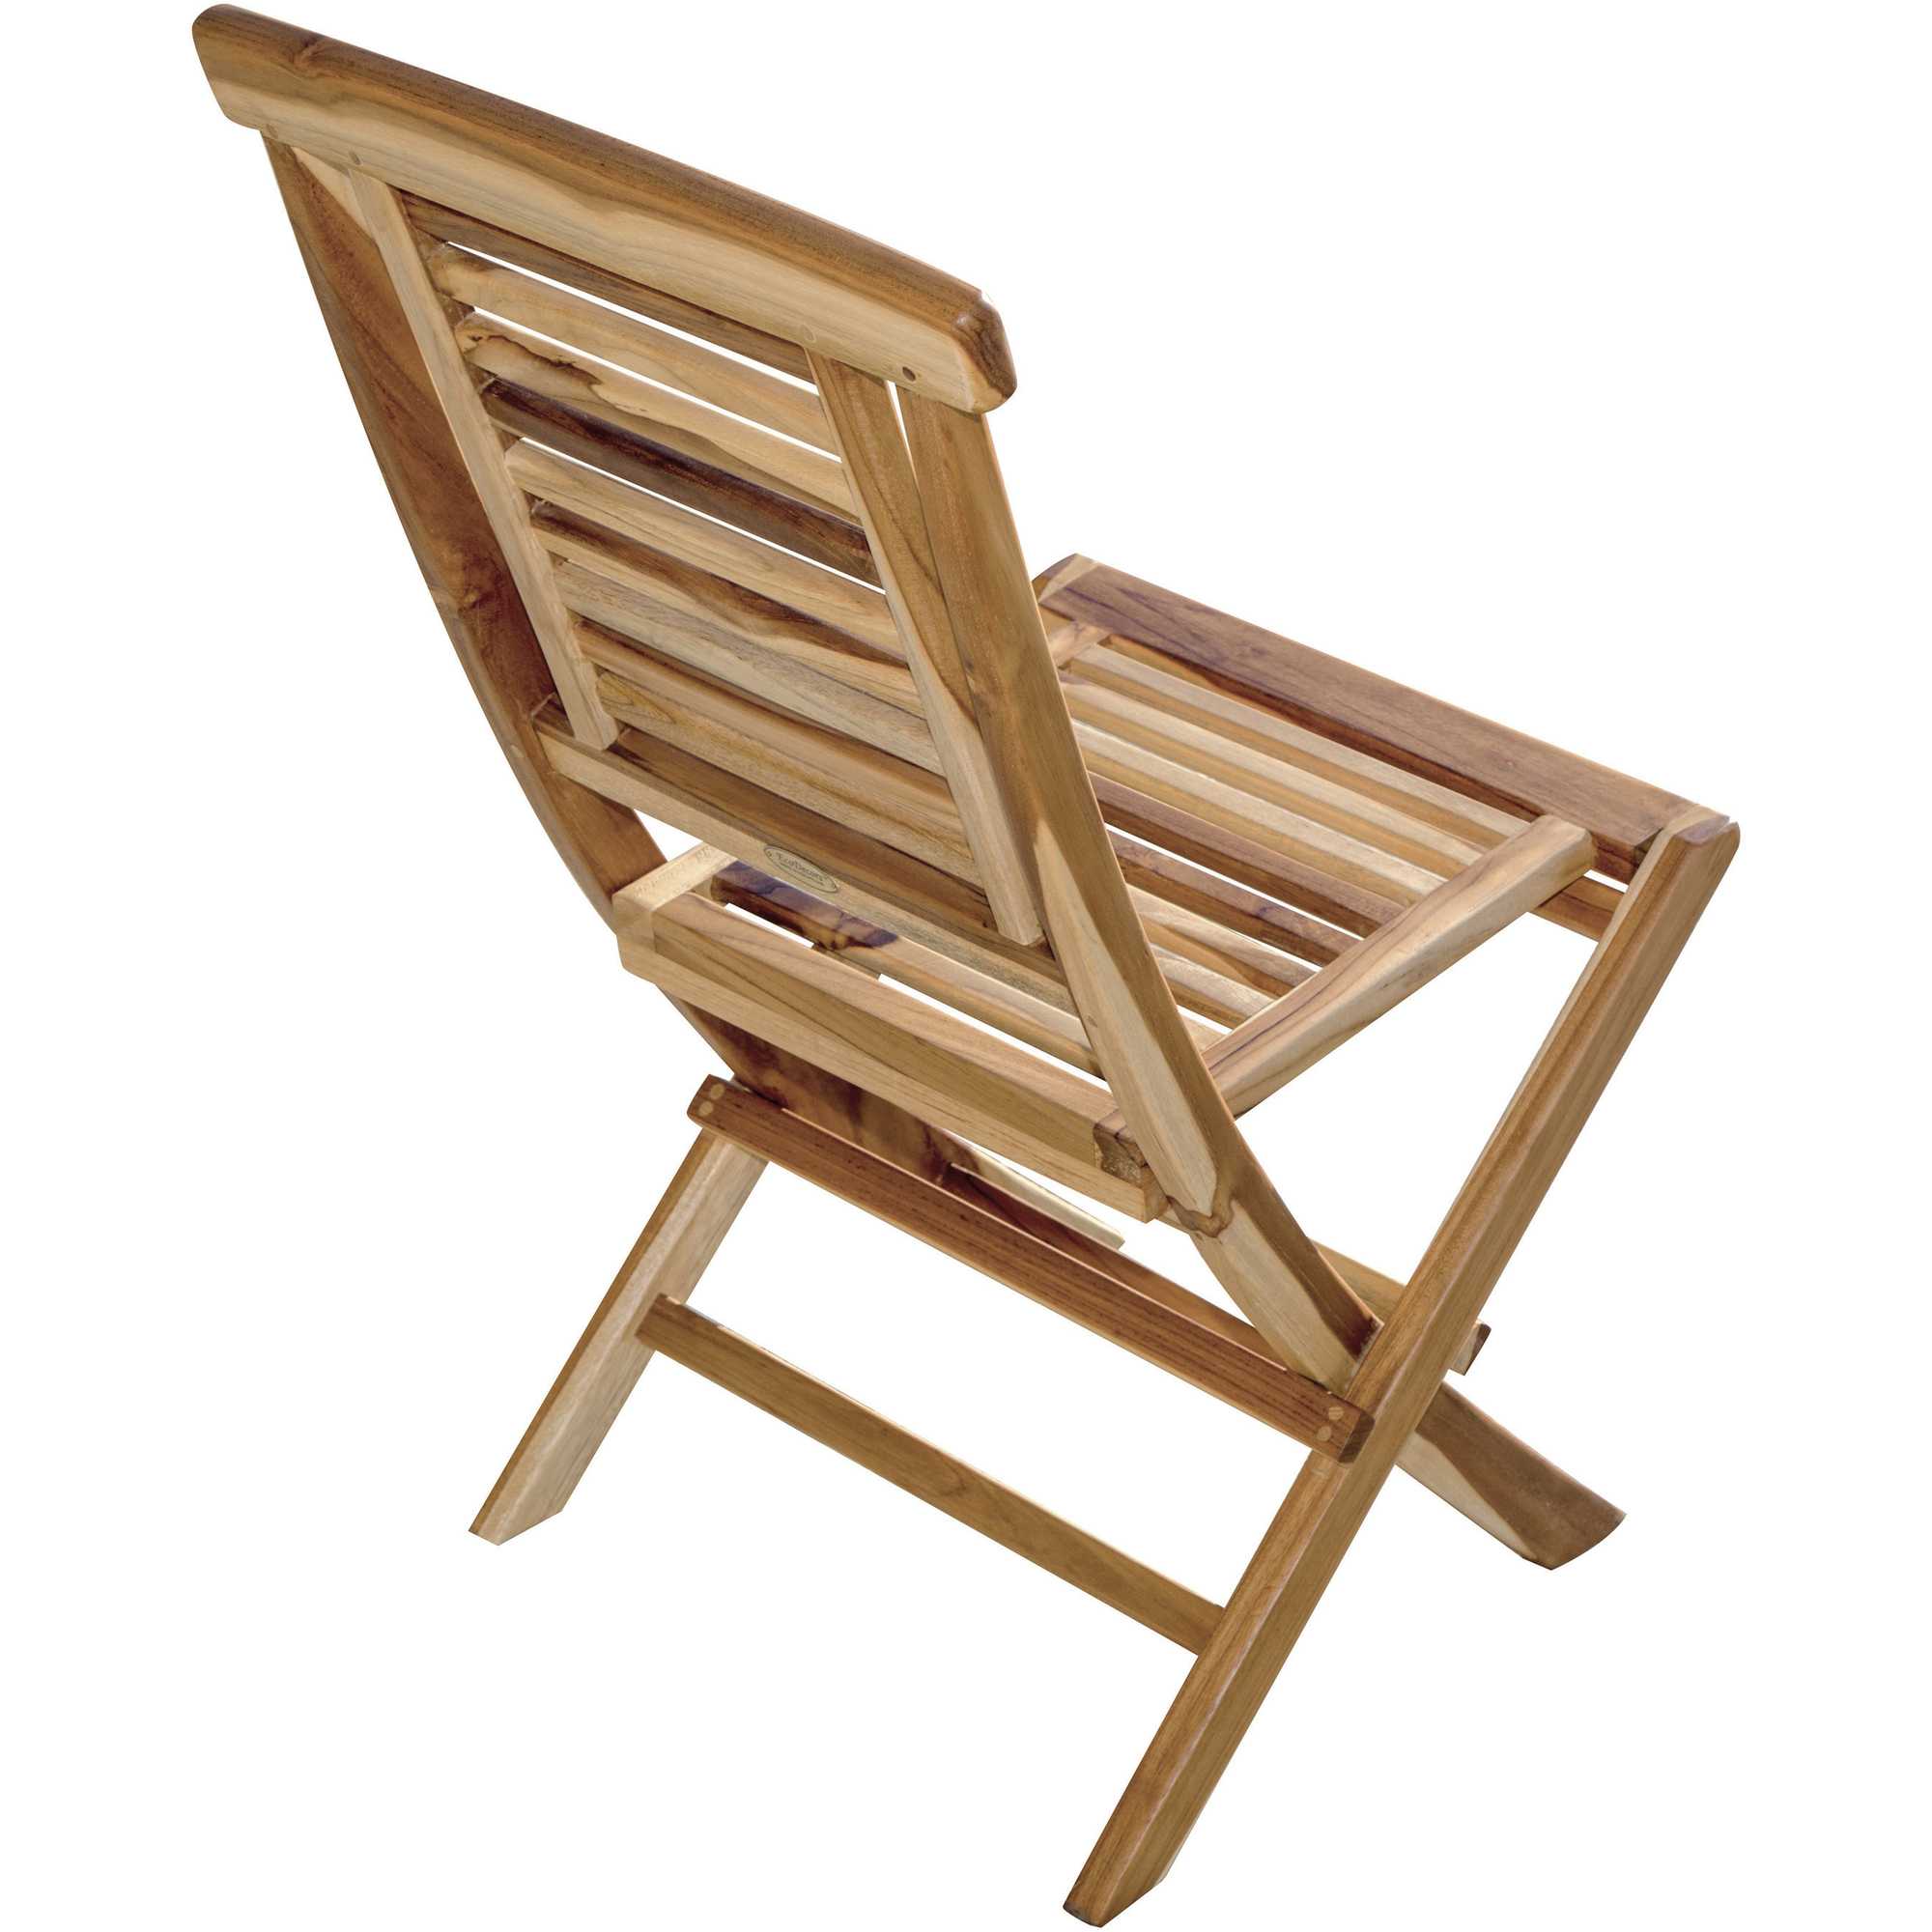 Compact Teak Folding Chair wStraight Design in Natural Finish